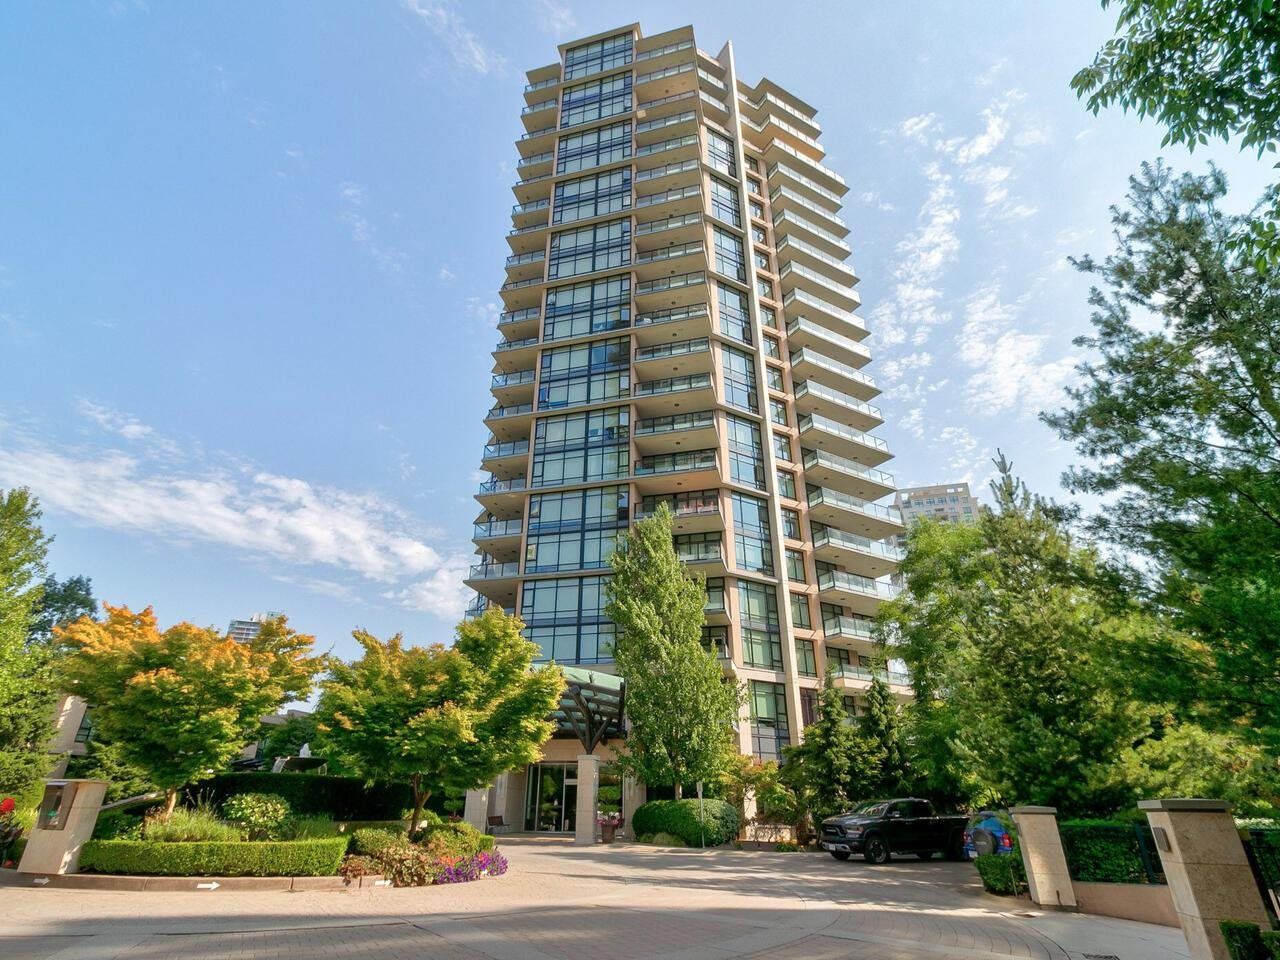 Main Photo: 801 6168 WILSON AVENUE in Burnaby: Metrotown Condo for sale (Burnaby South)  : MLS®# R2607303